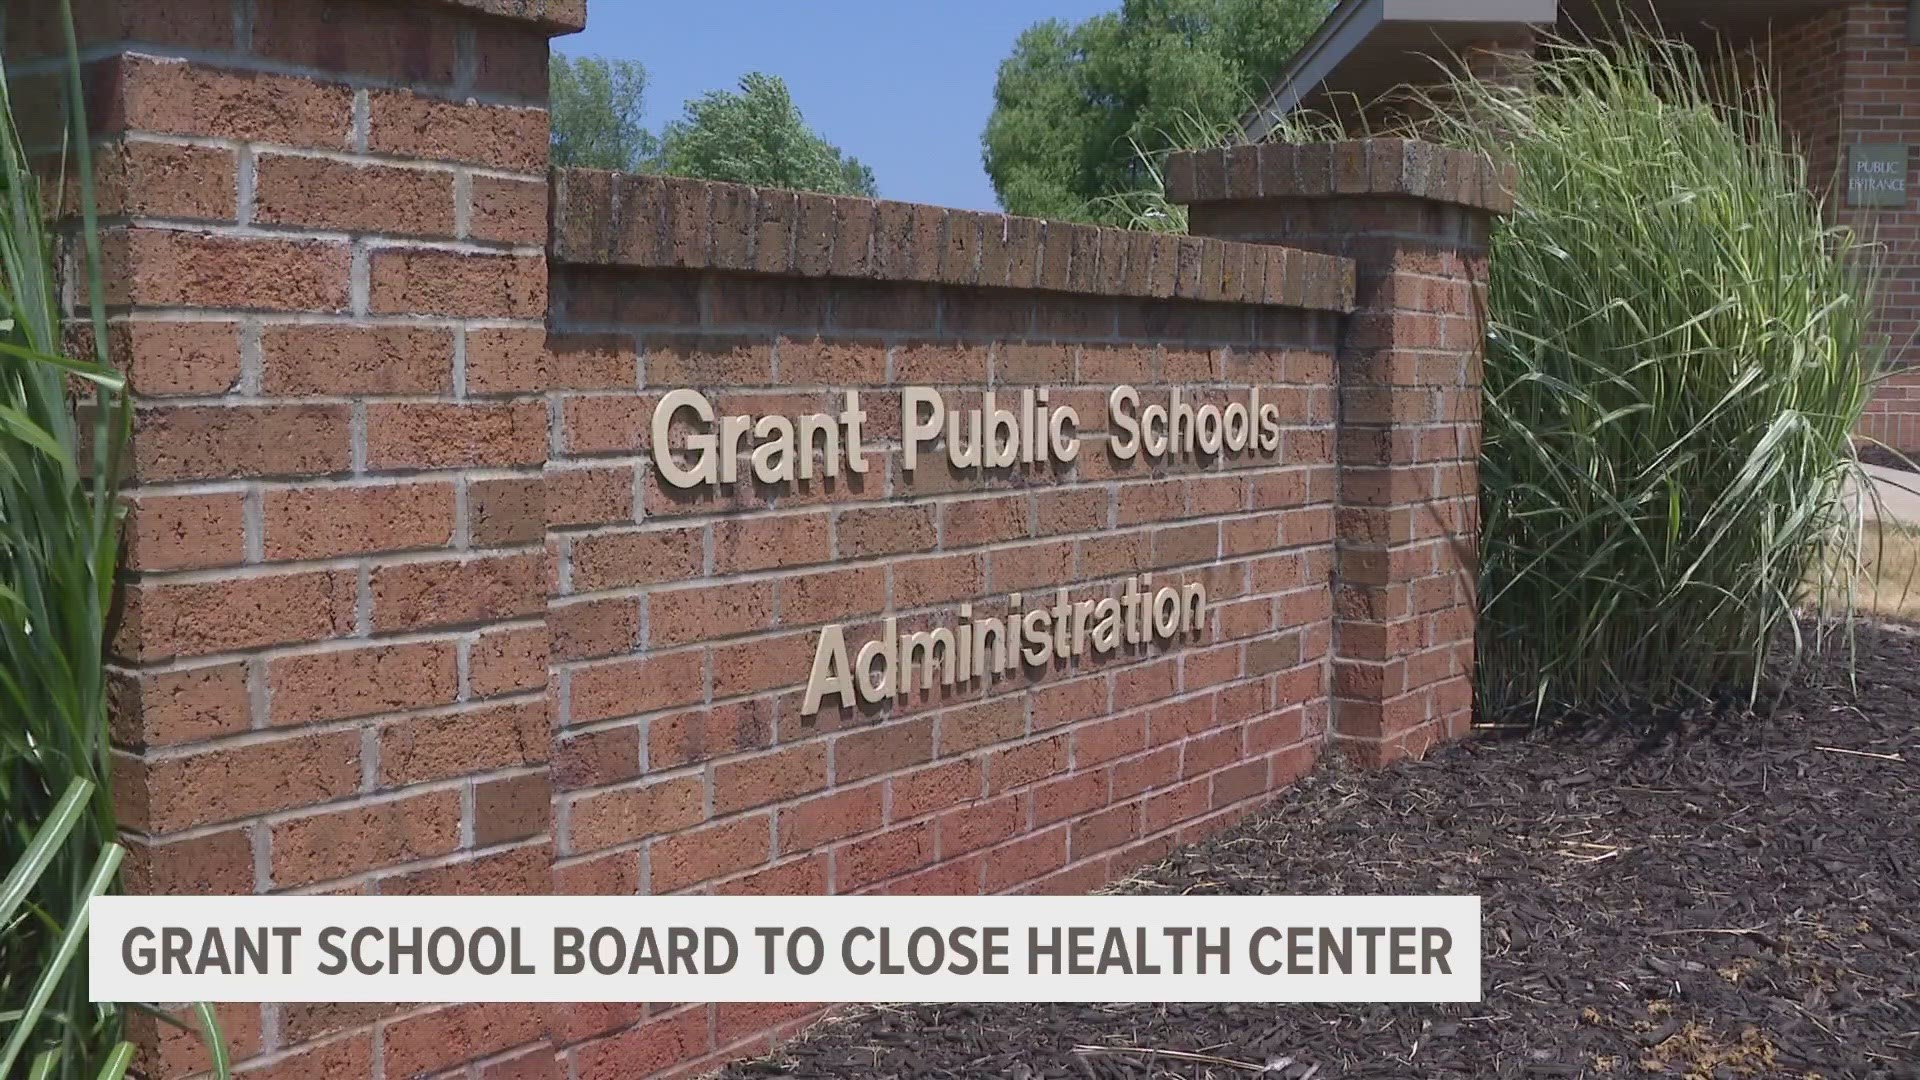 In a special session, the Grant School Board approved a resolution to close the Child and Adolescent Health Center in Grant Middle School